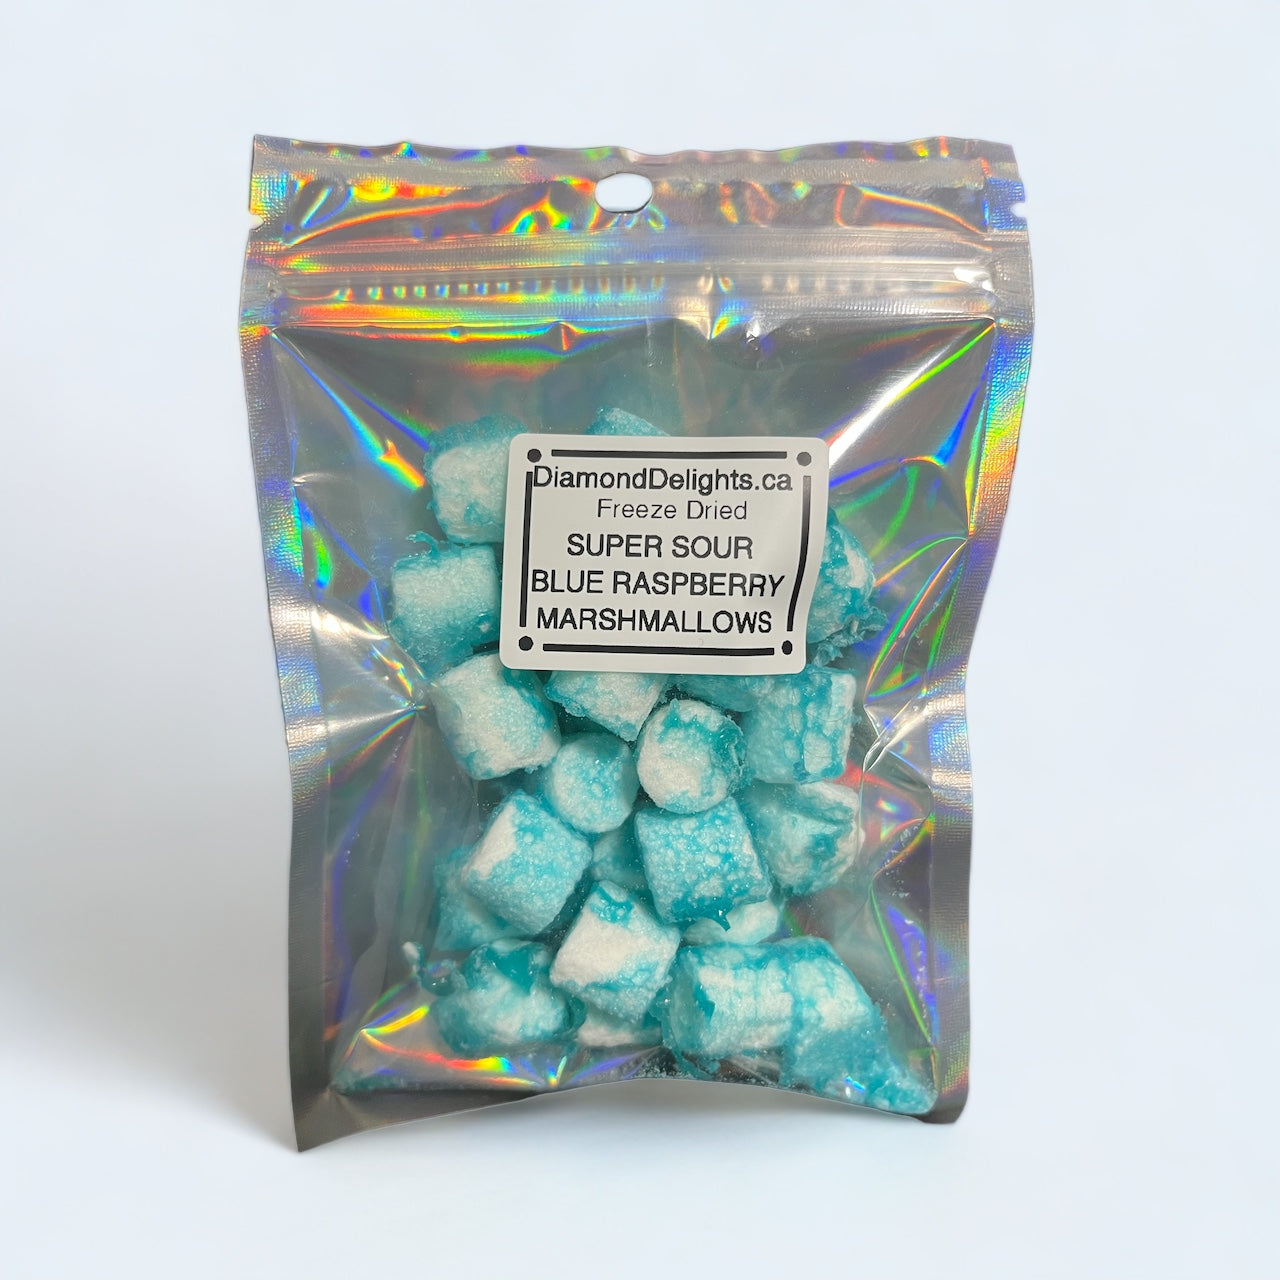 Exclusive new item: super sour (yes, these are pretty sour) blue raspberry marshmallows